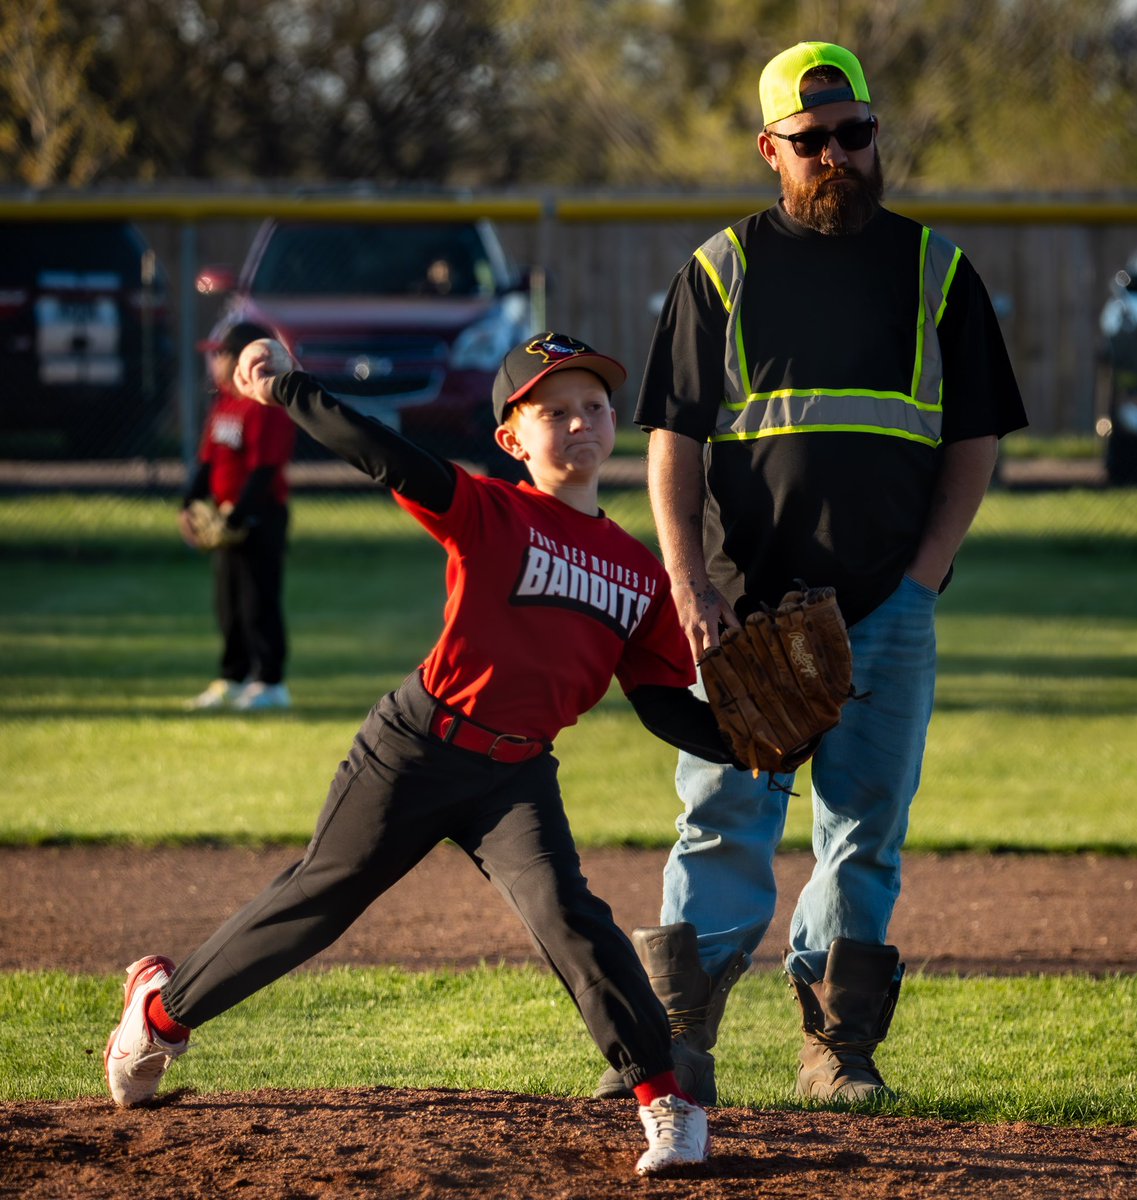 I live for THIS! Being able to not only coach my son but to be his dad is truly the best feeling! 

Happiness caught in one picture!

#BaseBall #LittleLeague